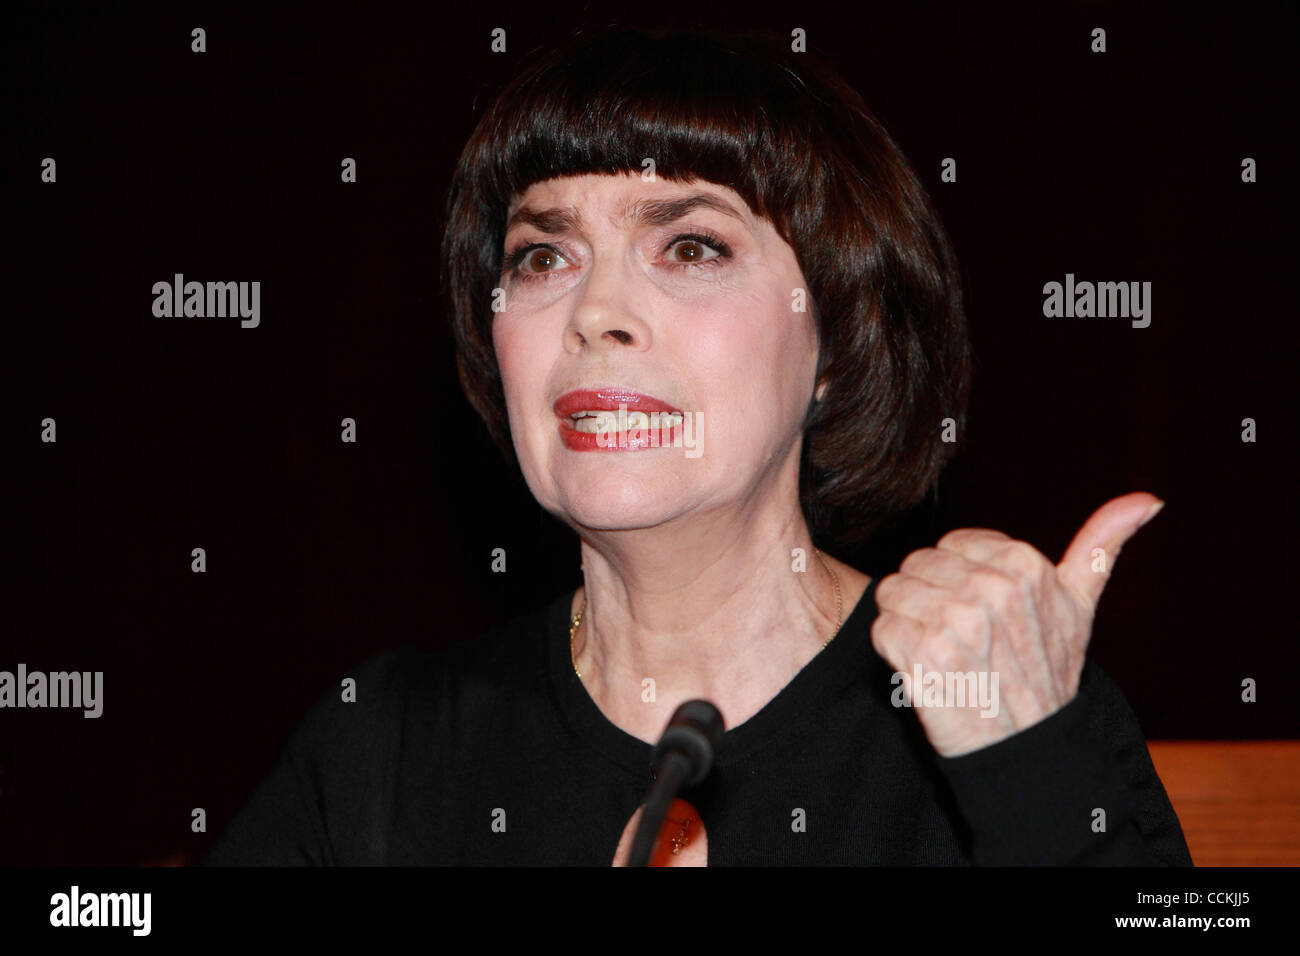 French singer Mireille Mathieu at the press conference at National Hotel of Moscow. Mireille Mathieu will give a concert in Moscow on 18 November, 2010. Stock Photo